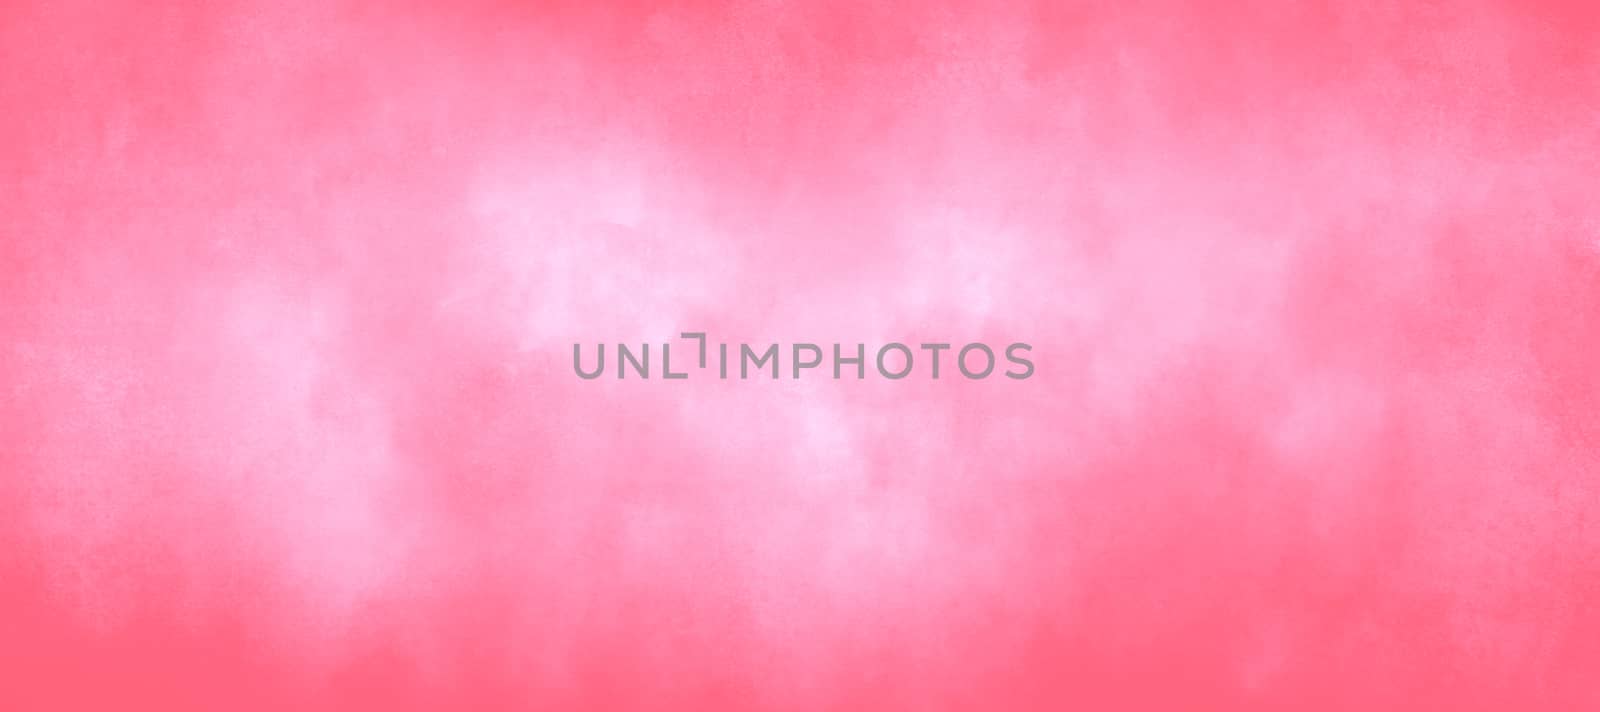 Abstract pink paper background texture, illustration, soft blurred texture in center with blank , simple elegant white background